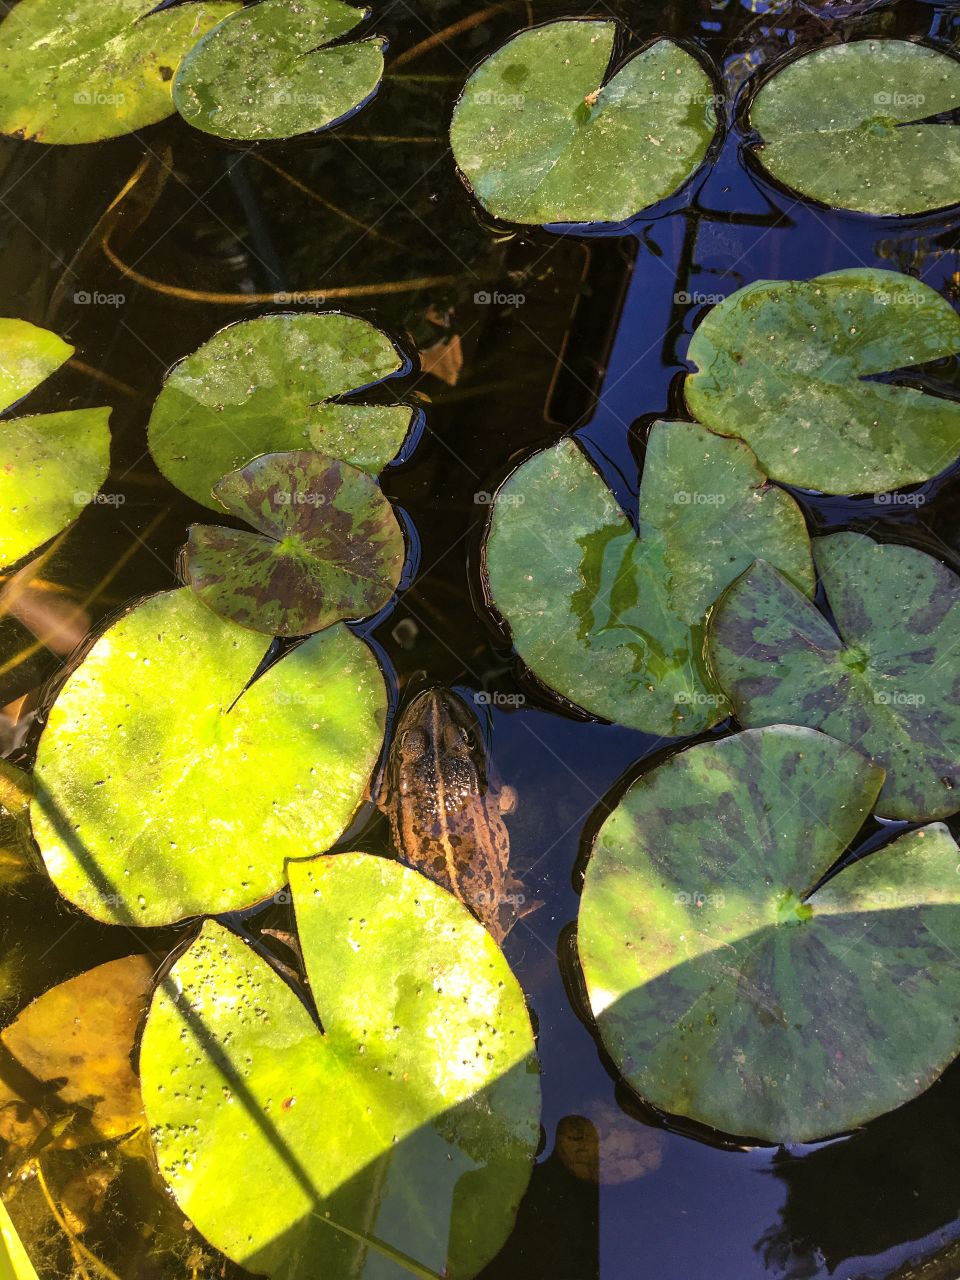 The Lilies in a garden pond and a frog. Home gardening ideas. Nature in the garden. 